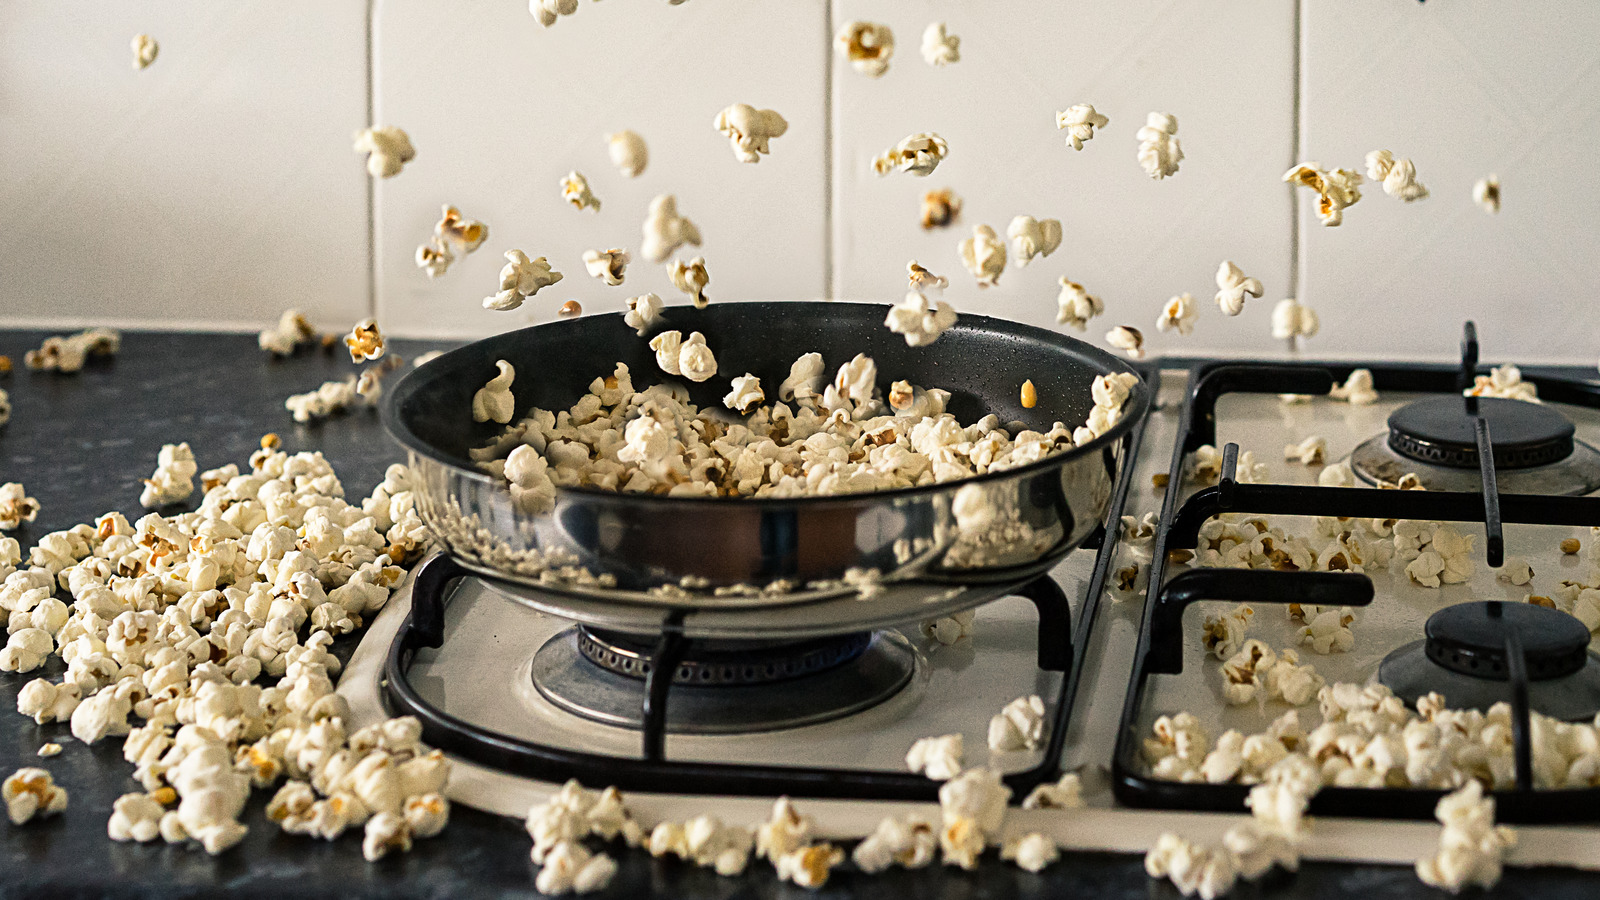 https://www.mashed.com/img/gallery/what-type-of-pot-should-you-use-when-making-popcorn/l-intro-1616787333.jpg